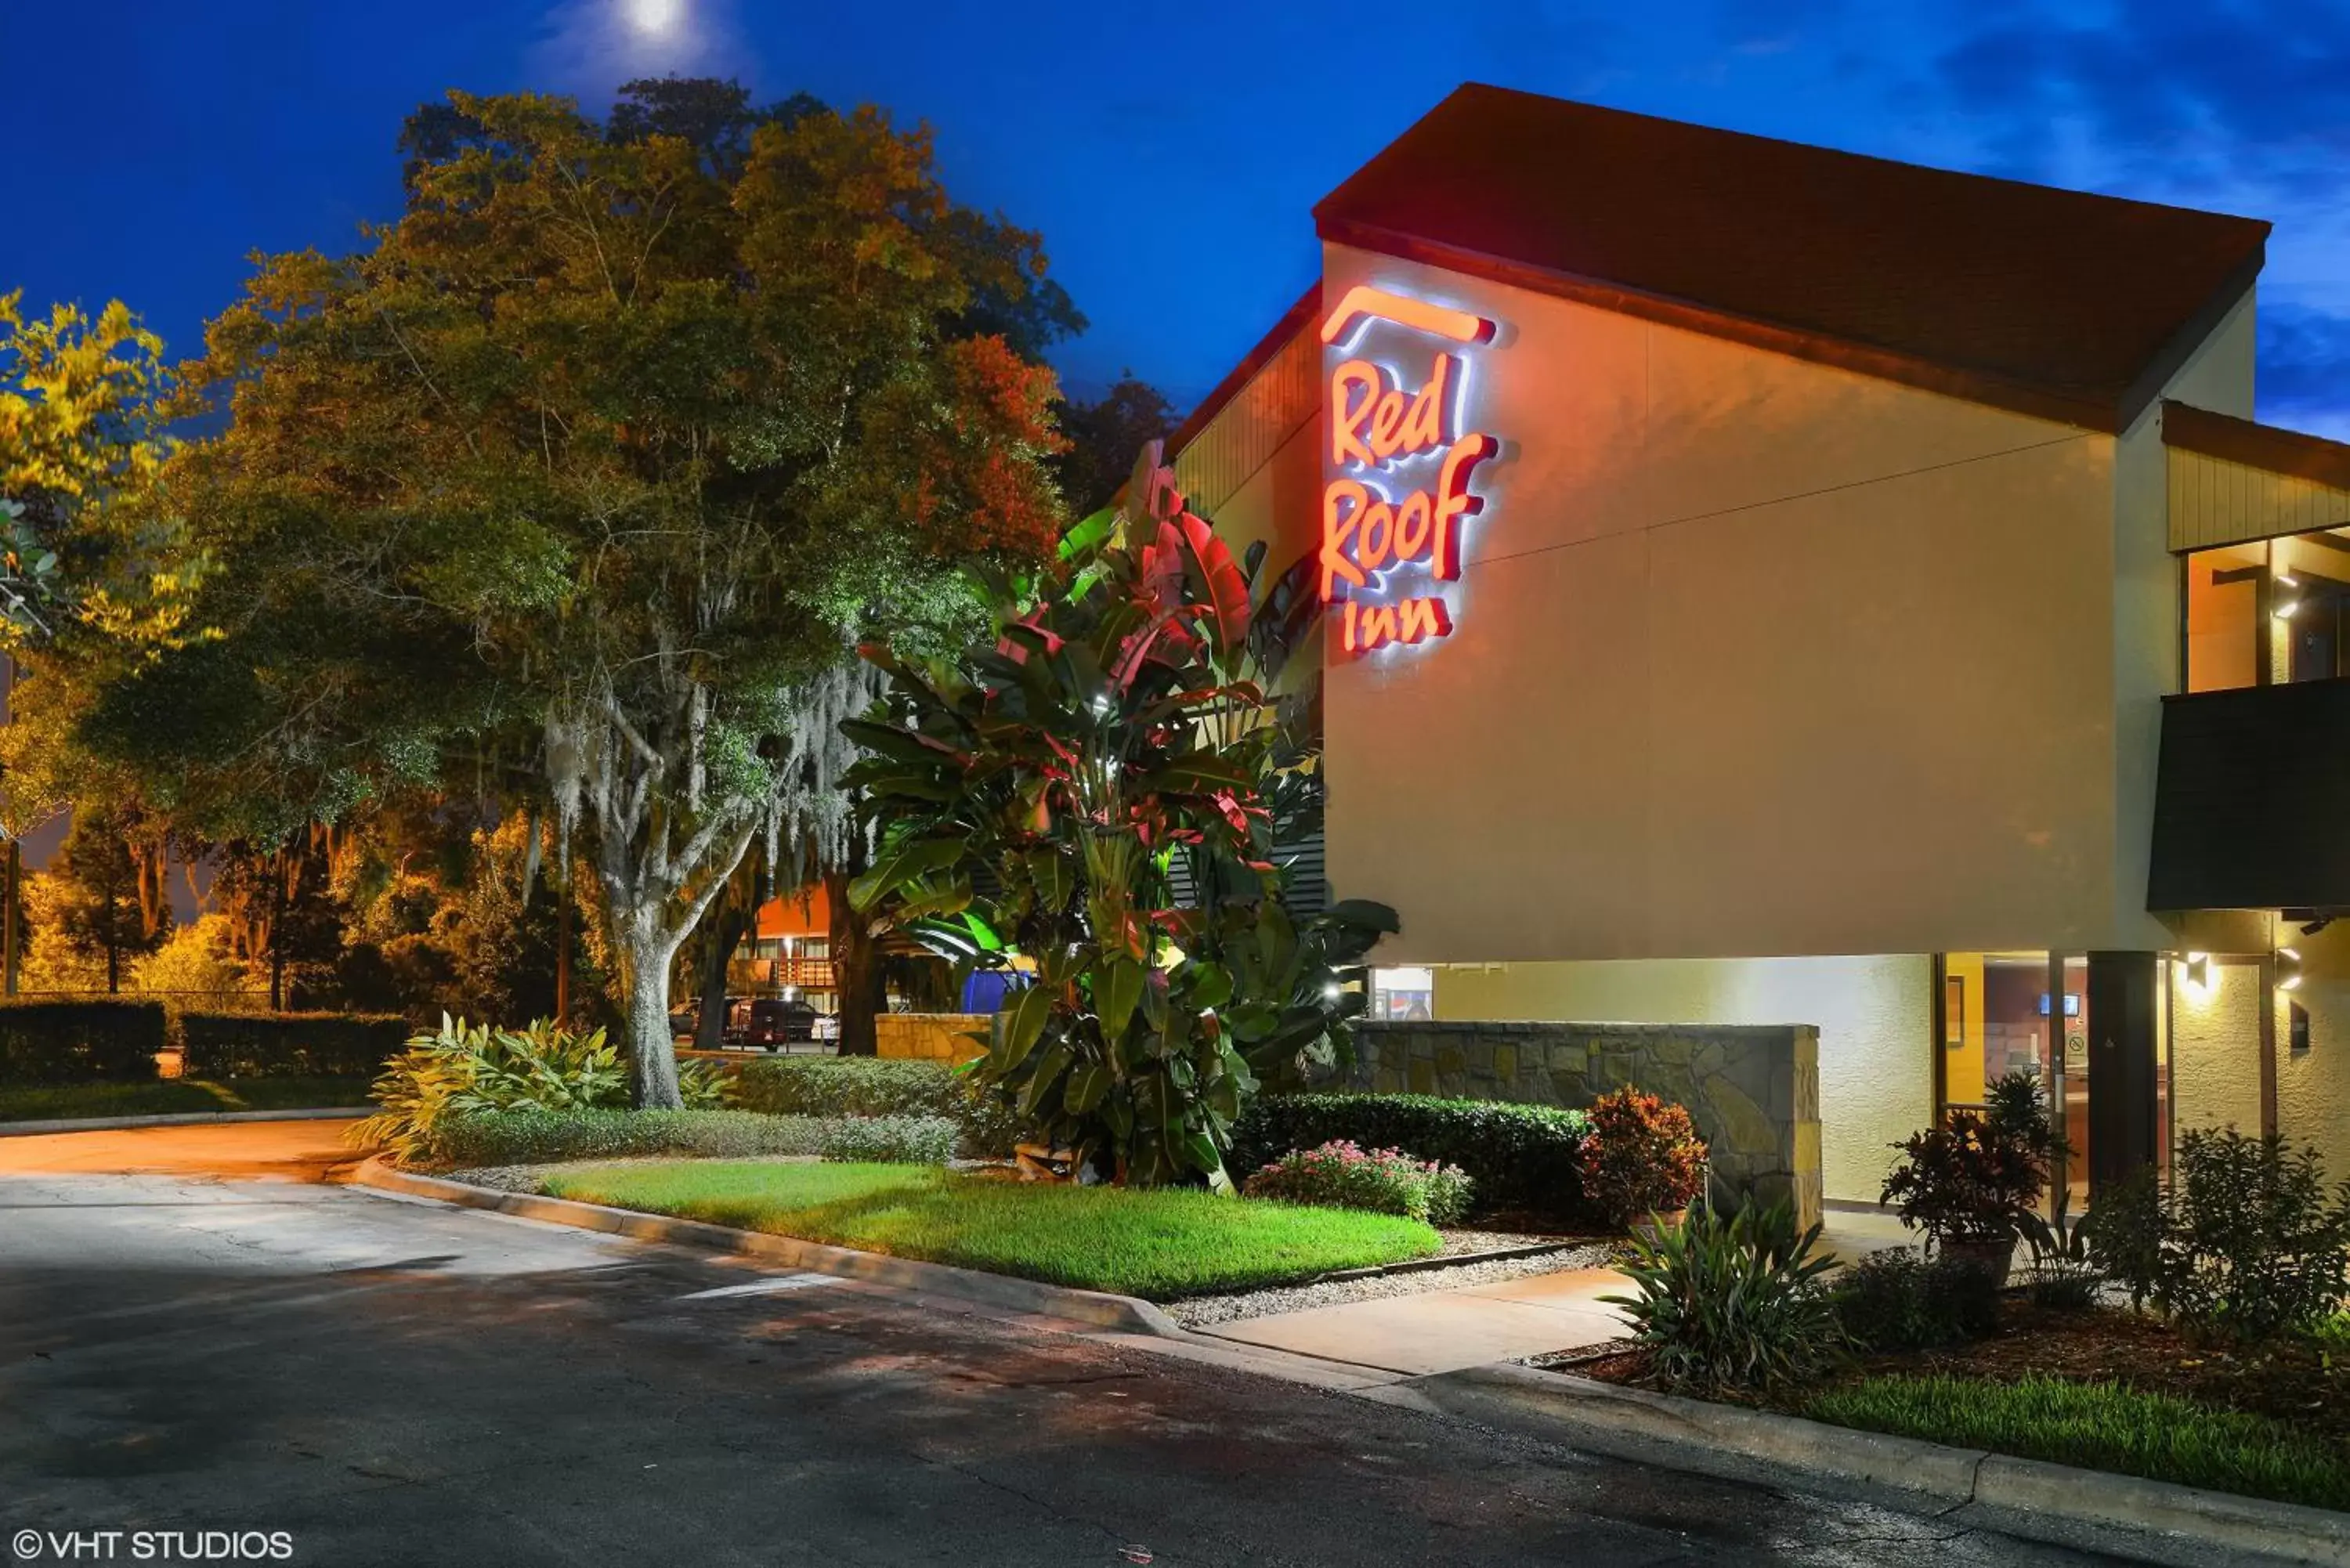 Property Building in Red Roof Inn Tampa Fairgrounds - Casino